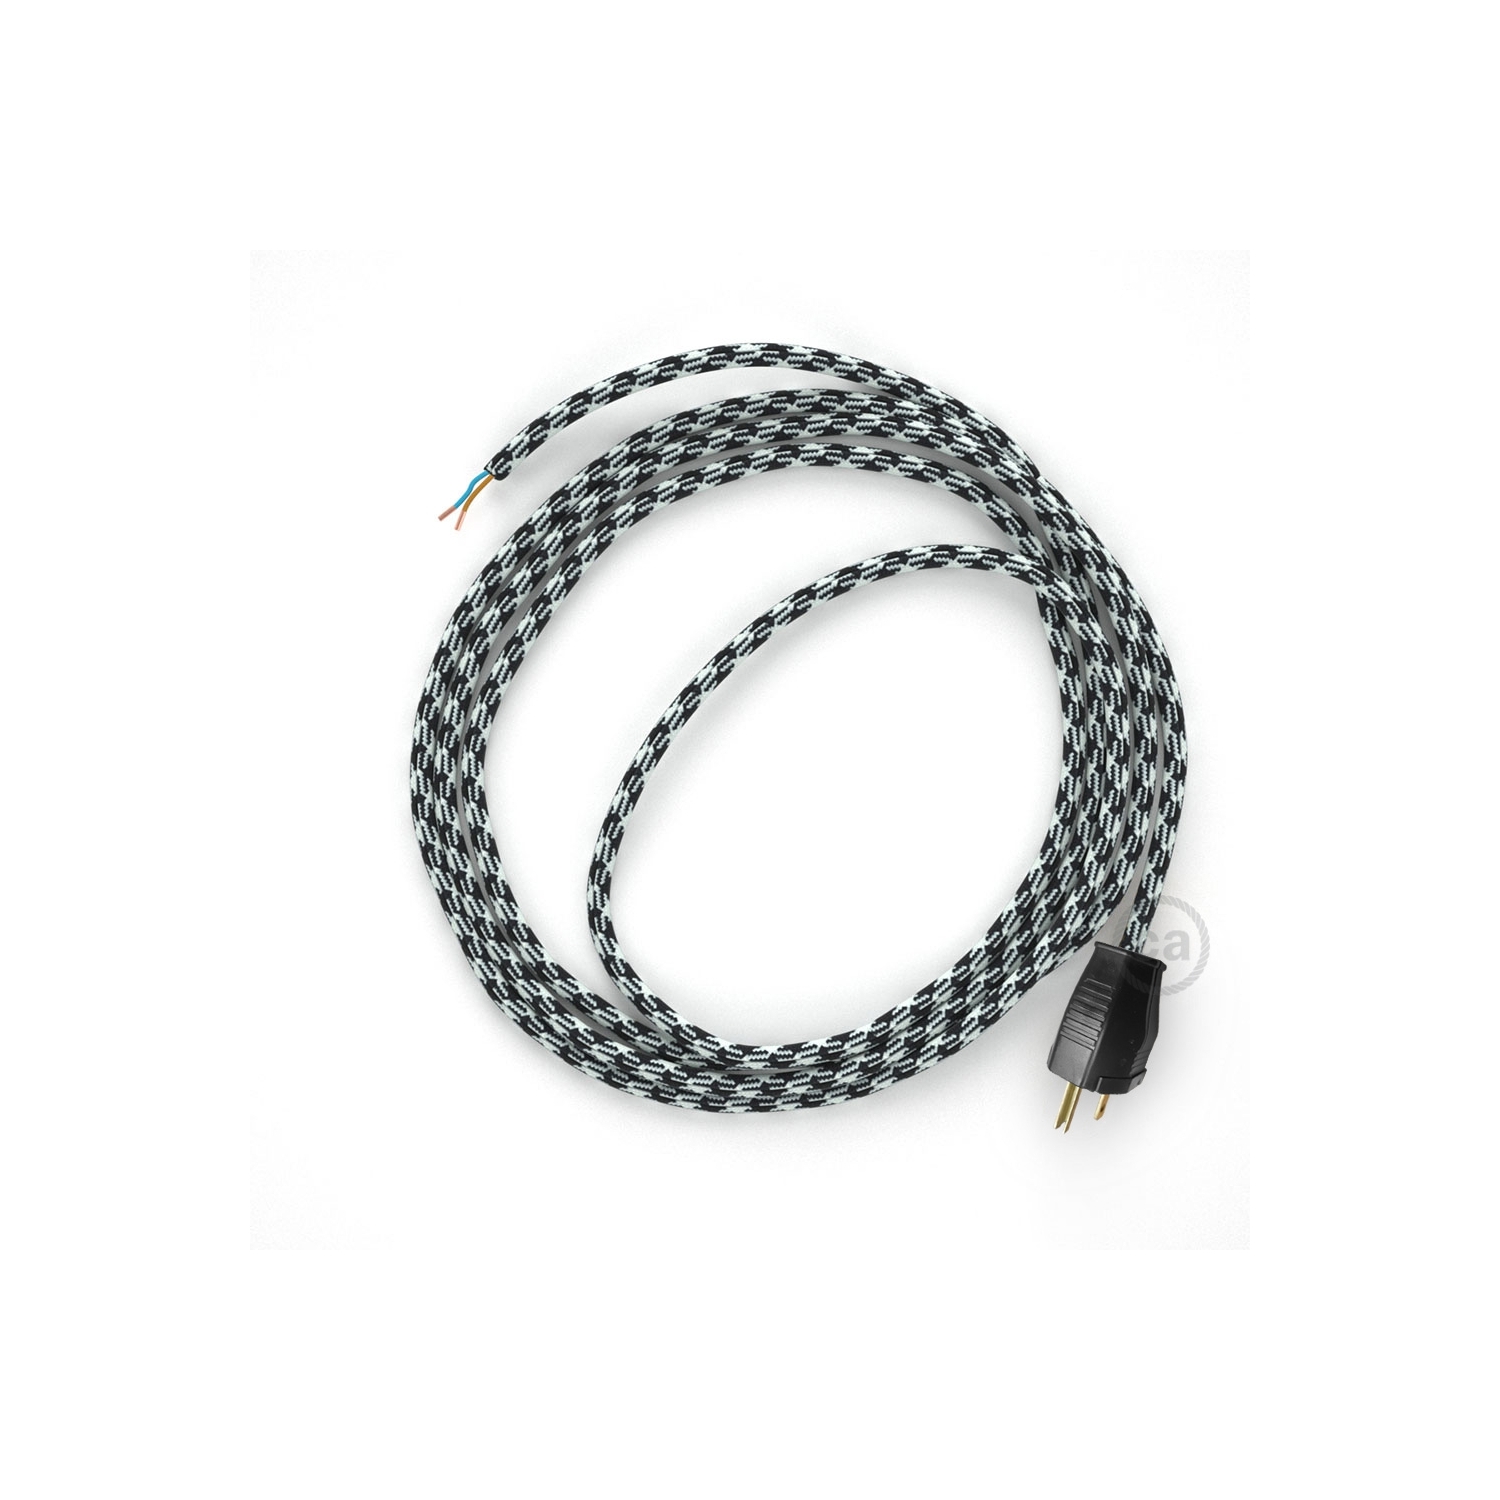 Cord-set - RP04 Black & White Houndstooth Covered Round Cable